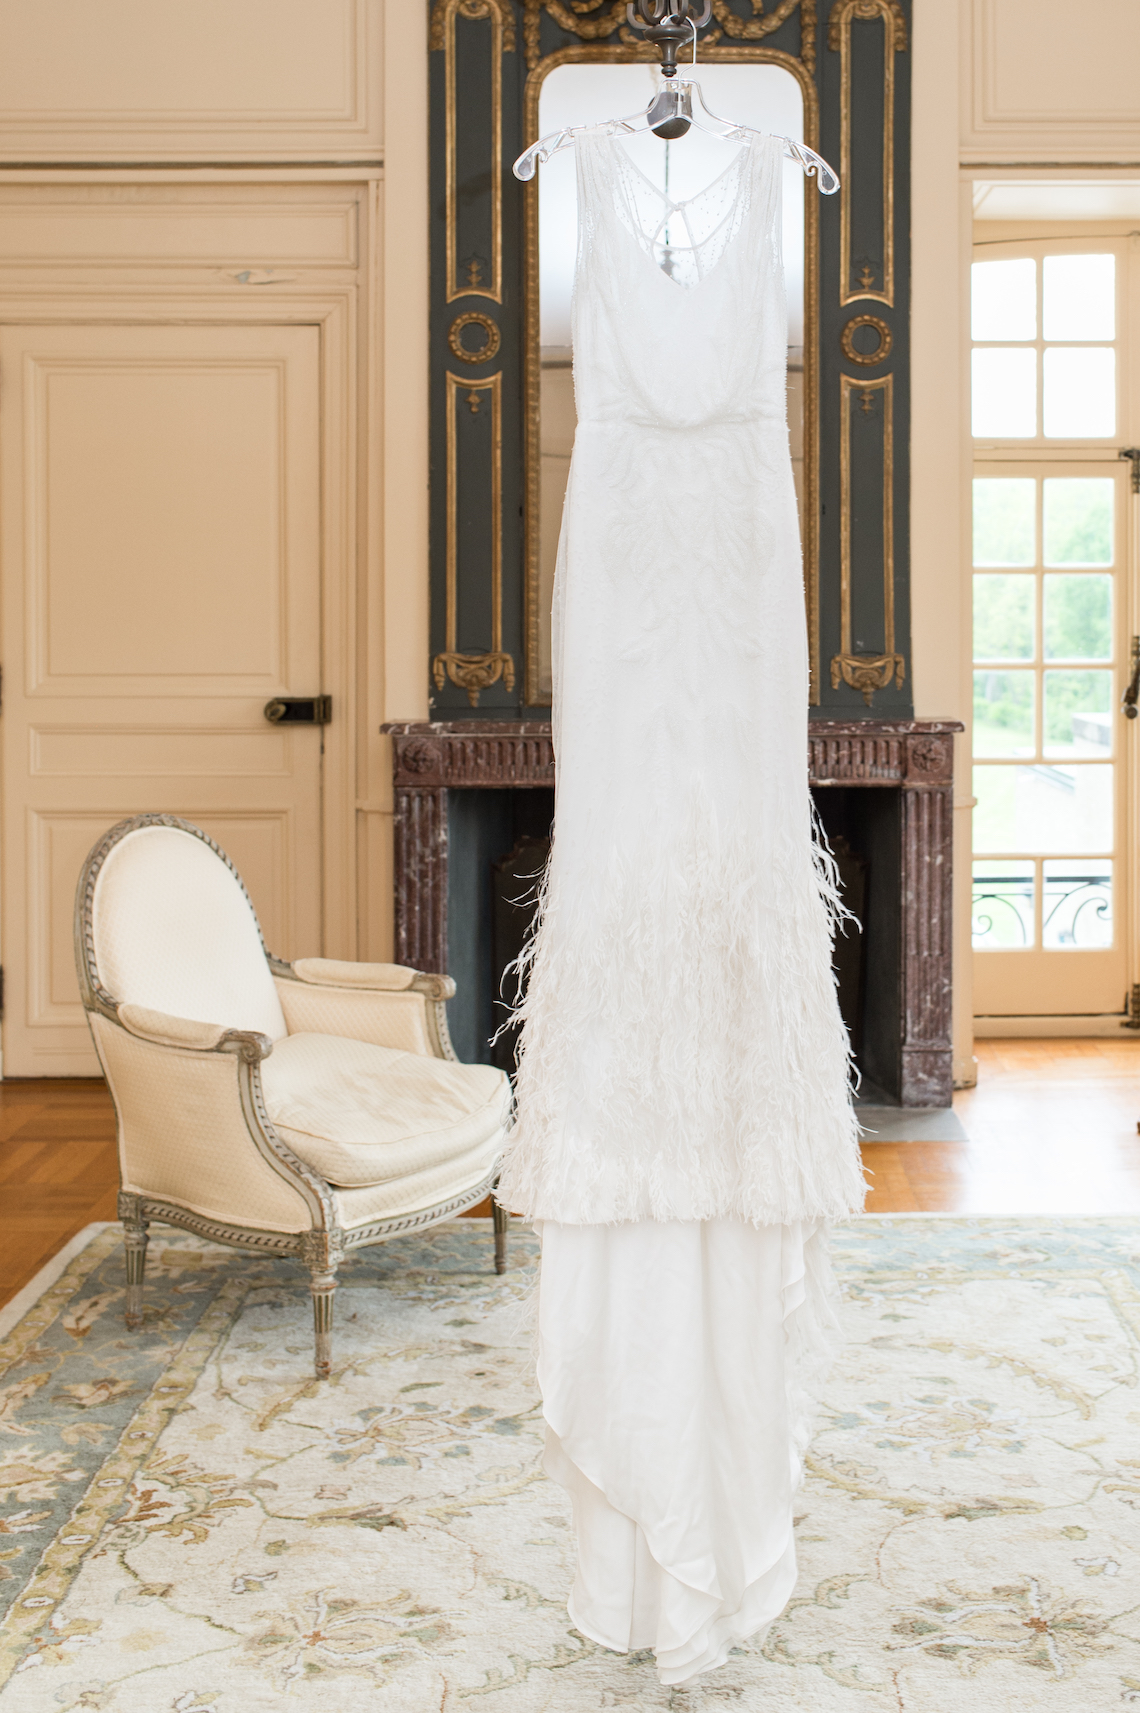 Upscale Art Deco Rhode Island Wedding With A Feathered Dress – Lynne Reznick Photography 37